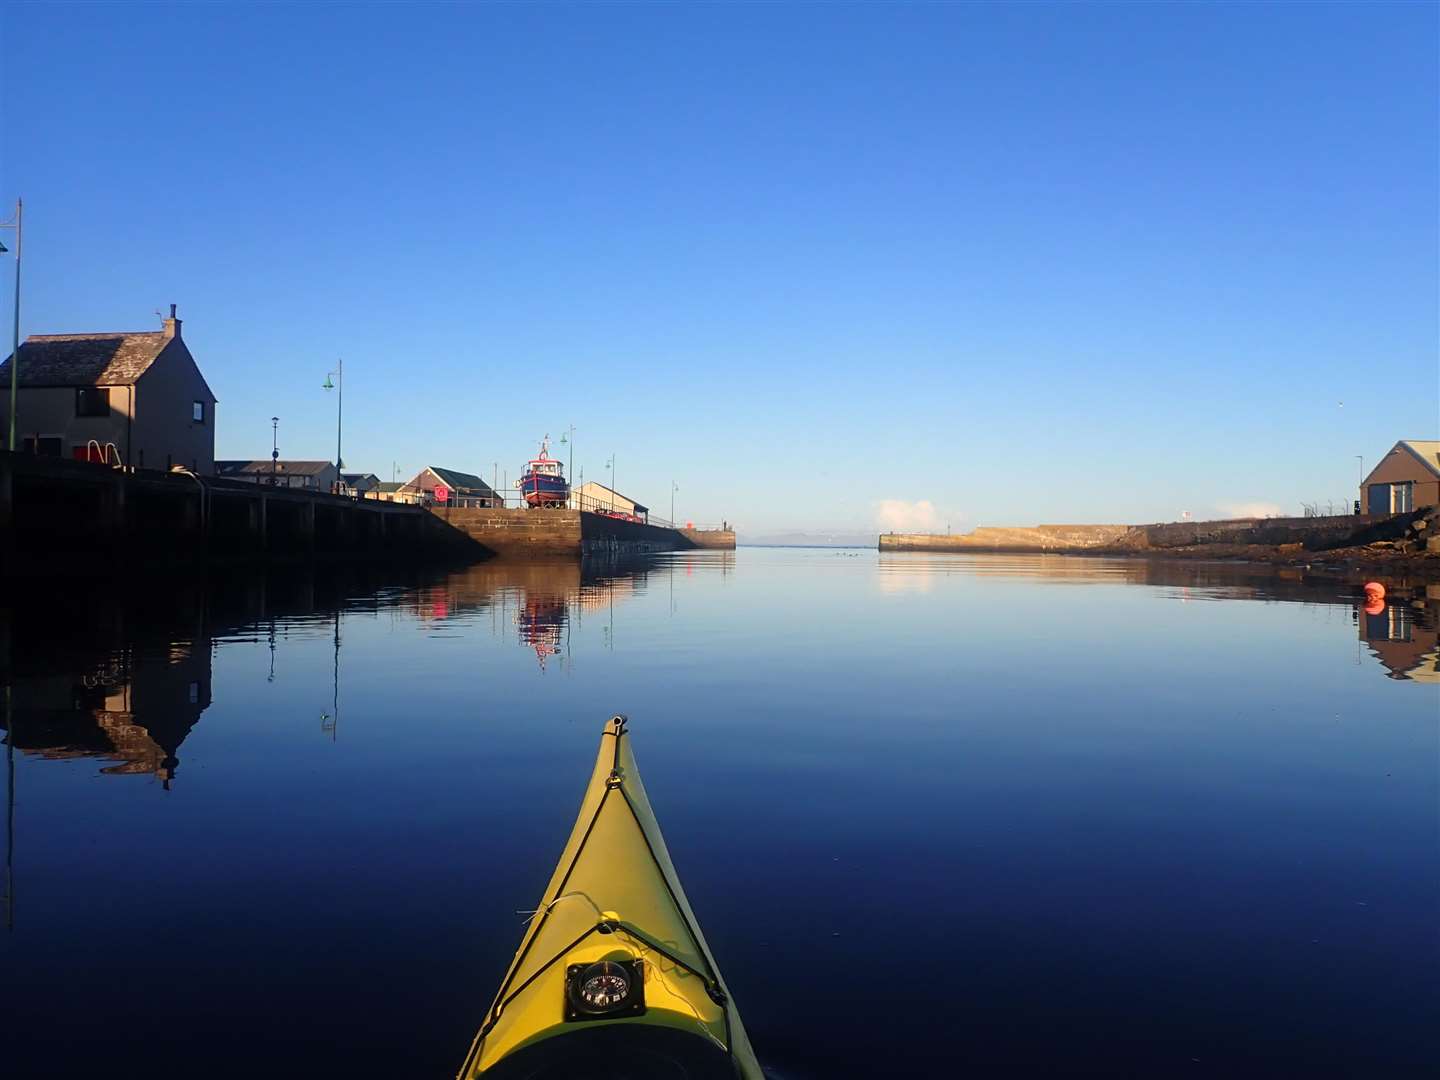 Reaching Thurso harbour in the still water.